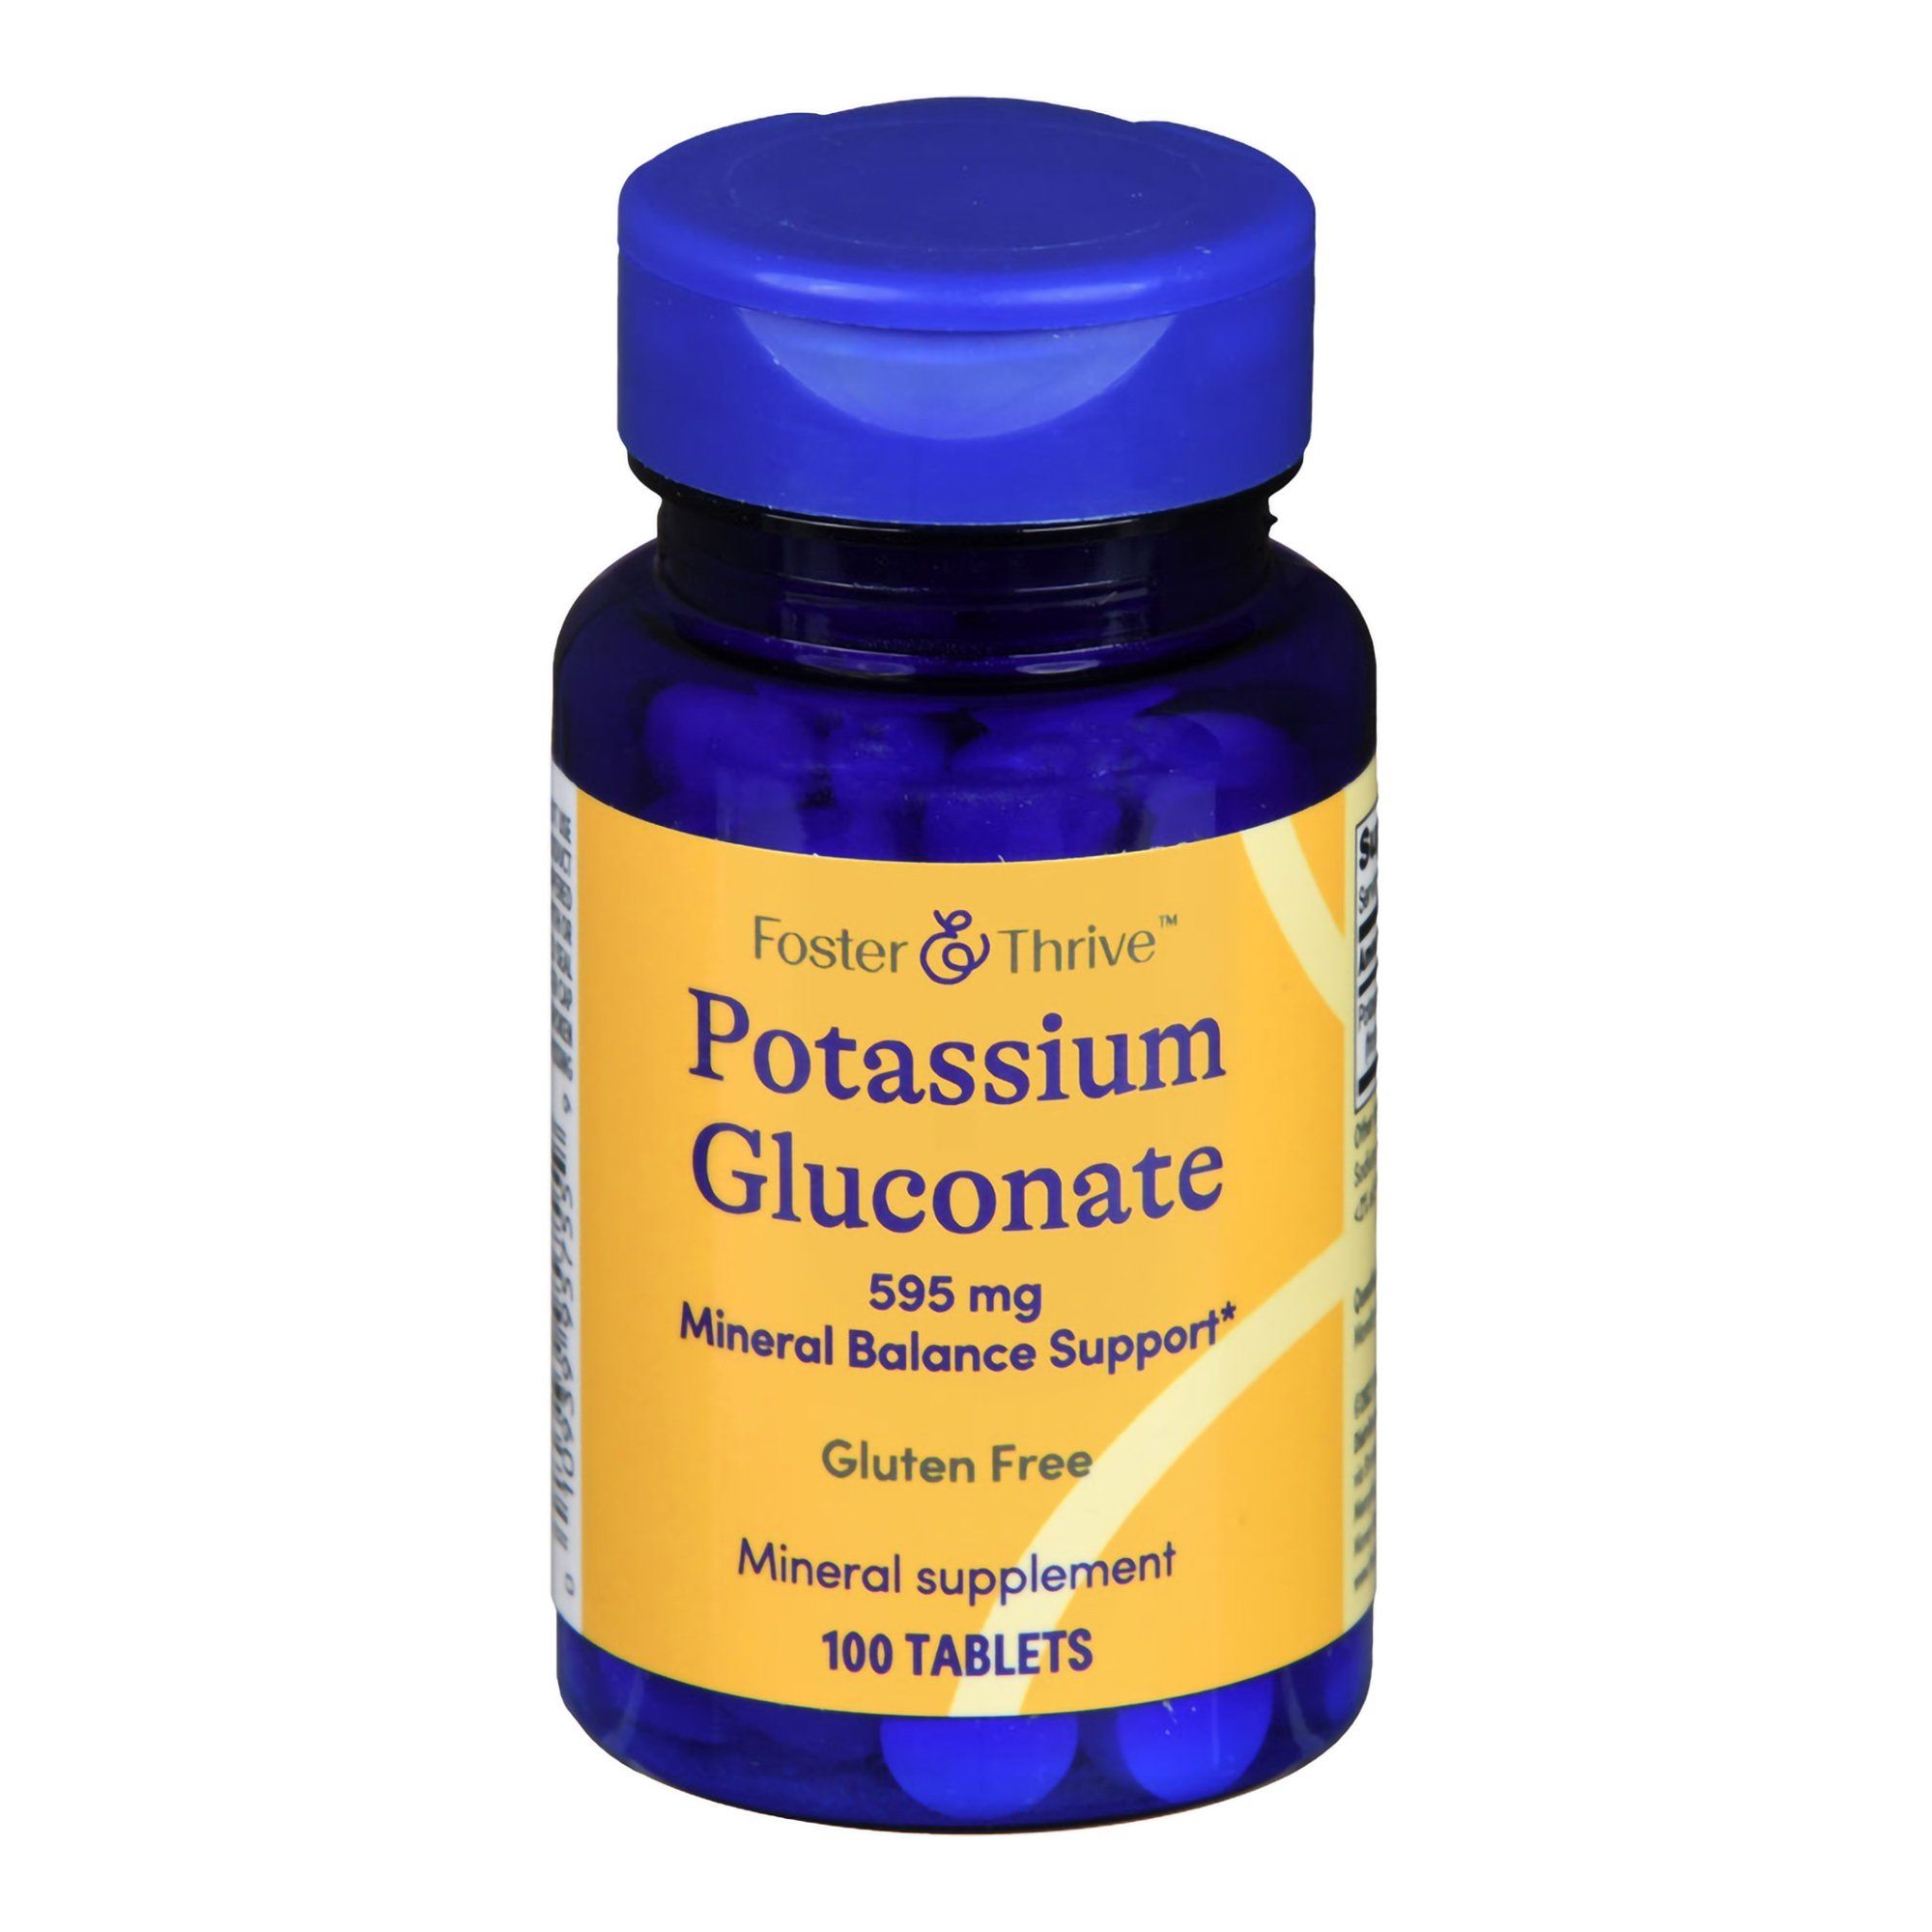 Foster & Thrive Potassium Gluconate Tablets, 595 mg - 100 ct